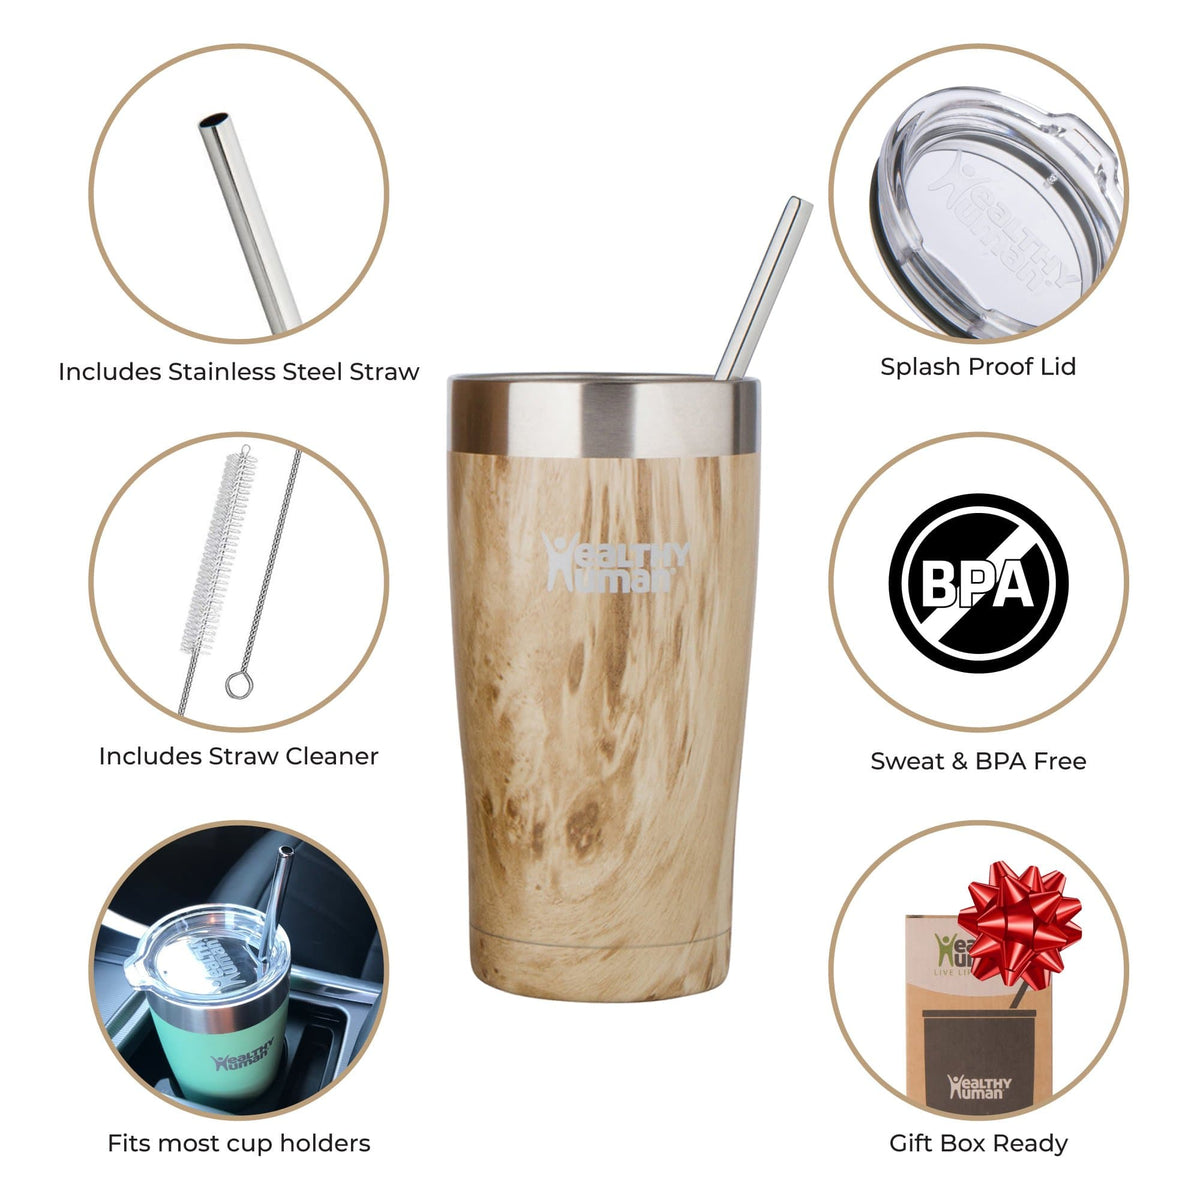 Uninterrupted Confidence Stainless Steel Tumbler w/Straw – Izzy & Liv